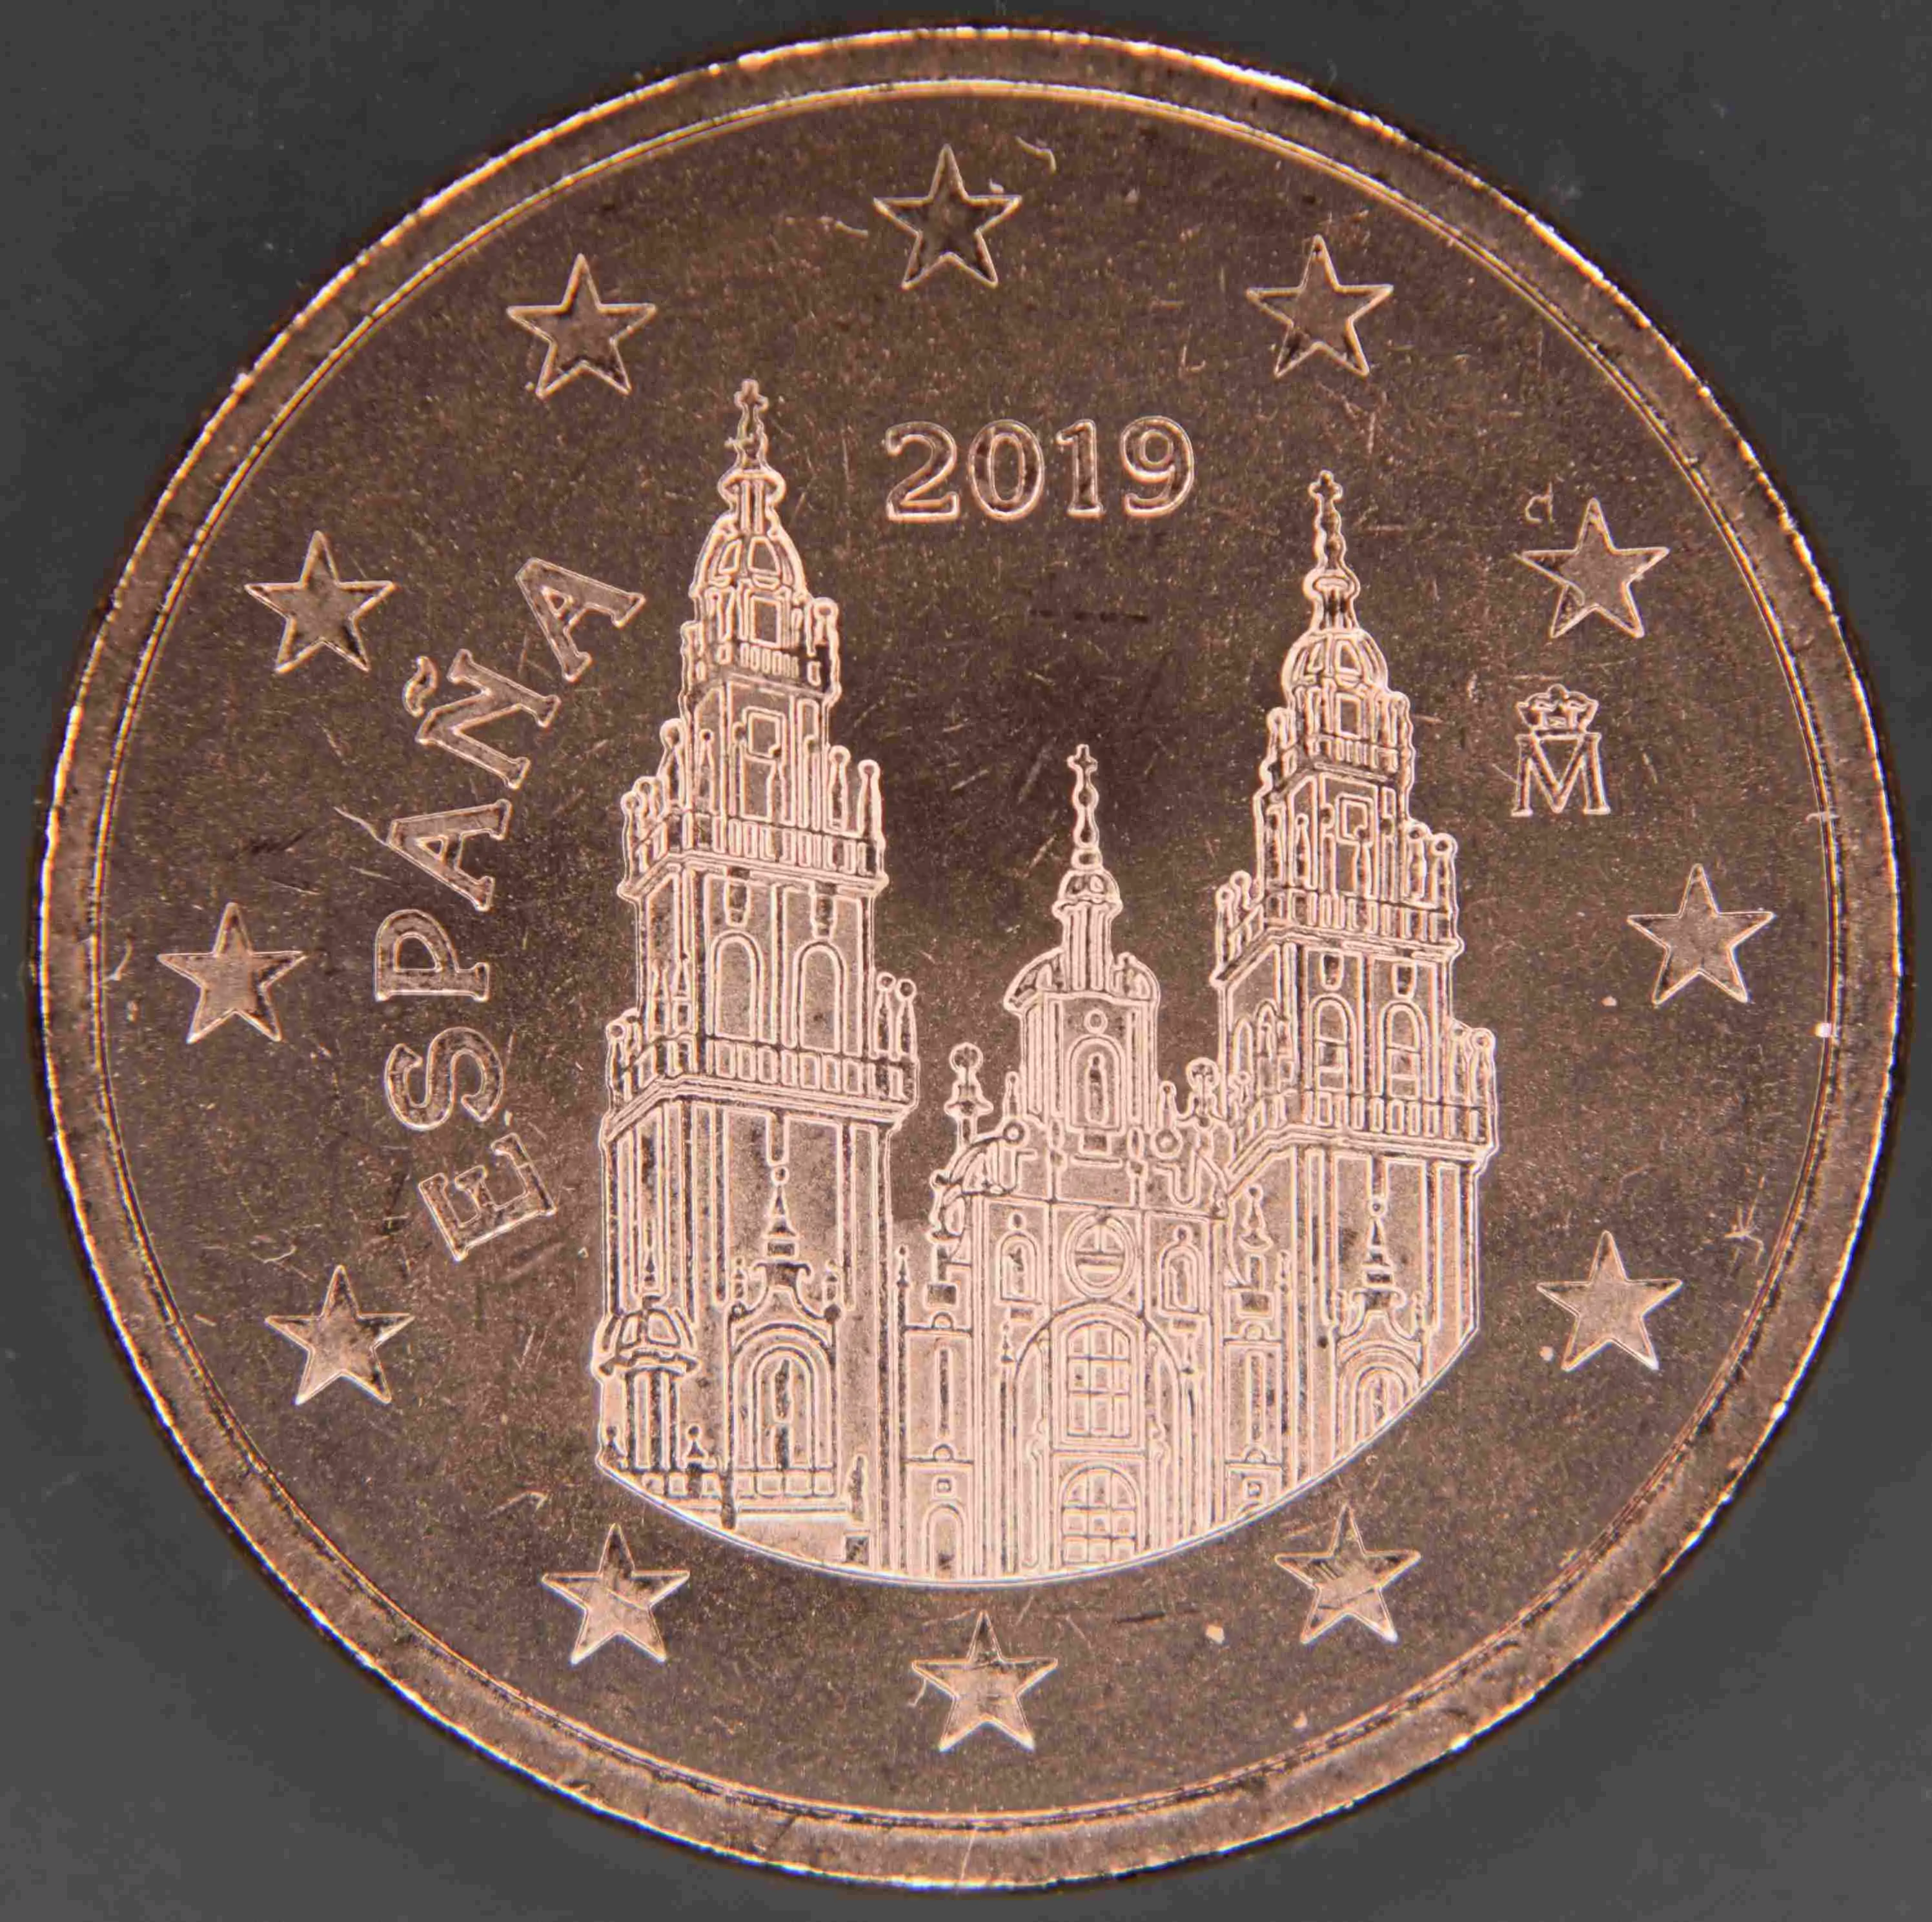 Spain Euro Coins UNC 2019 ᐅ Value, Mintage and Images at ...